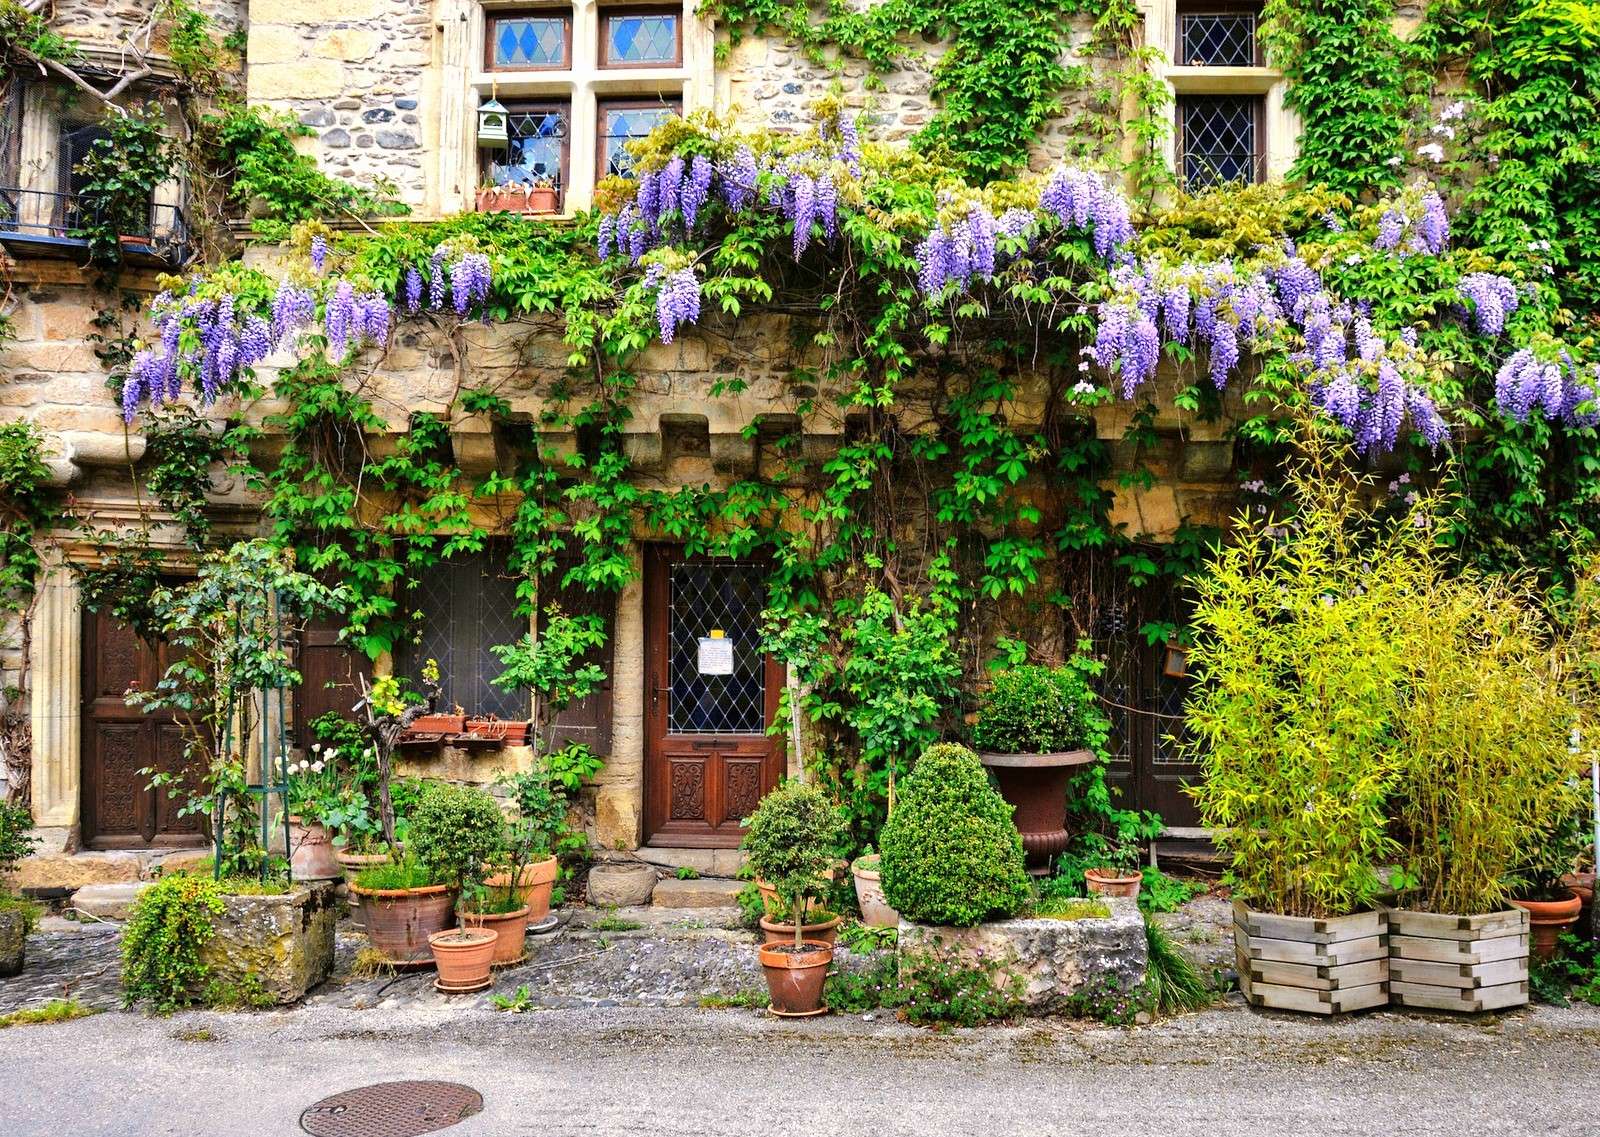 A house decorated with a wisteria vine jigsaw puzzle online